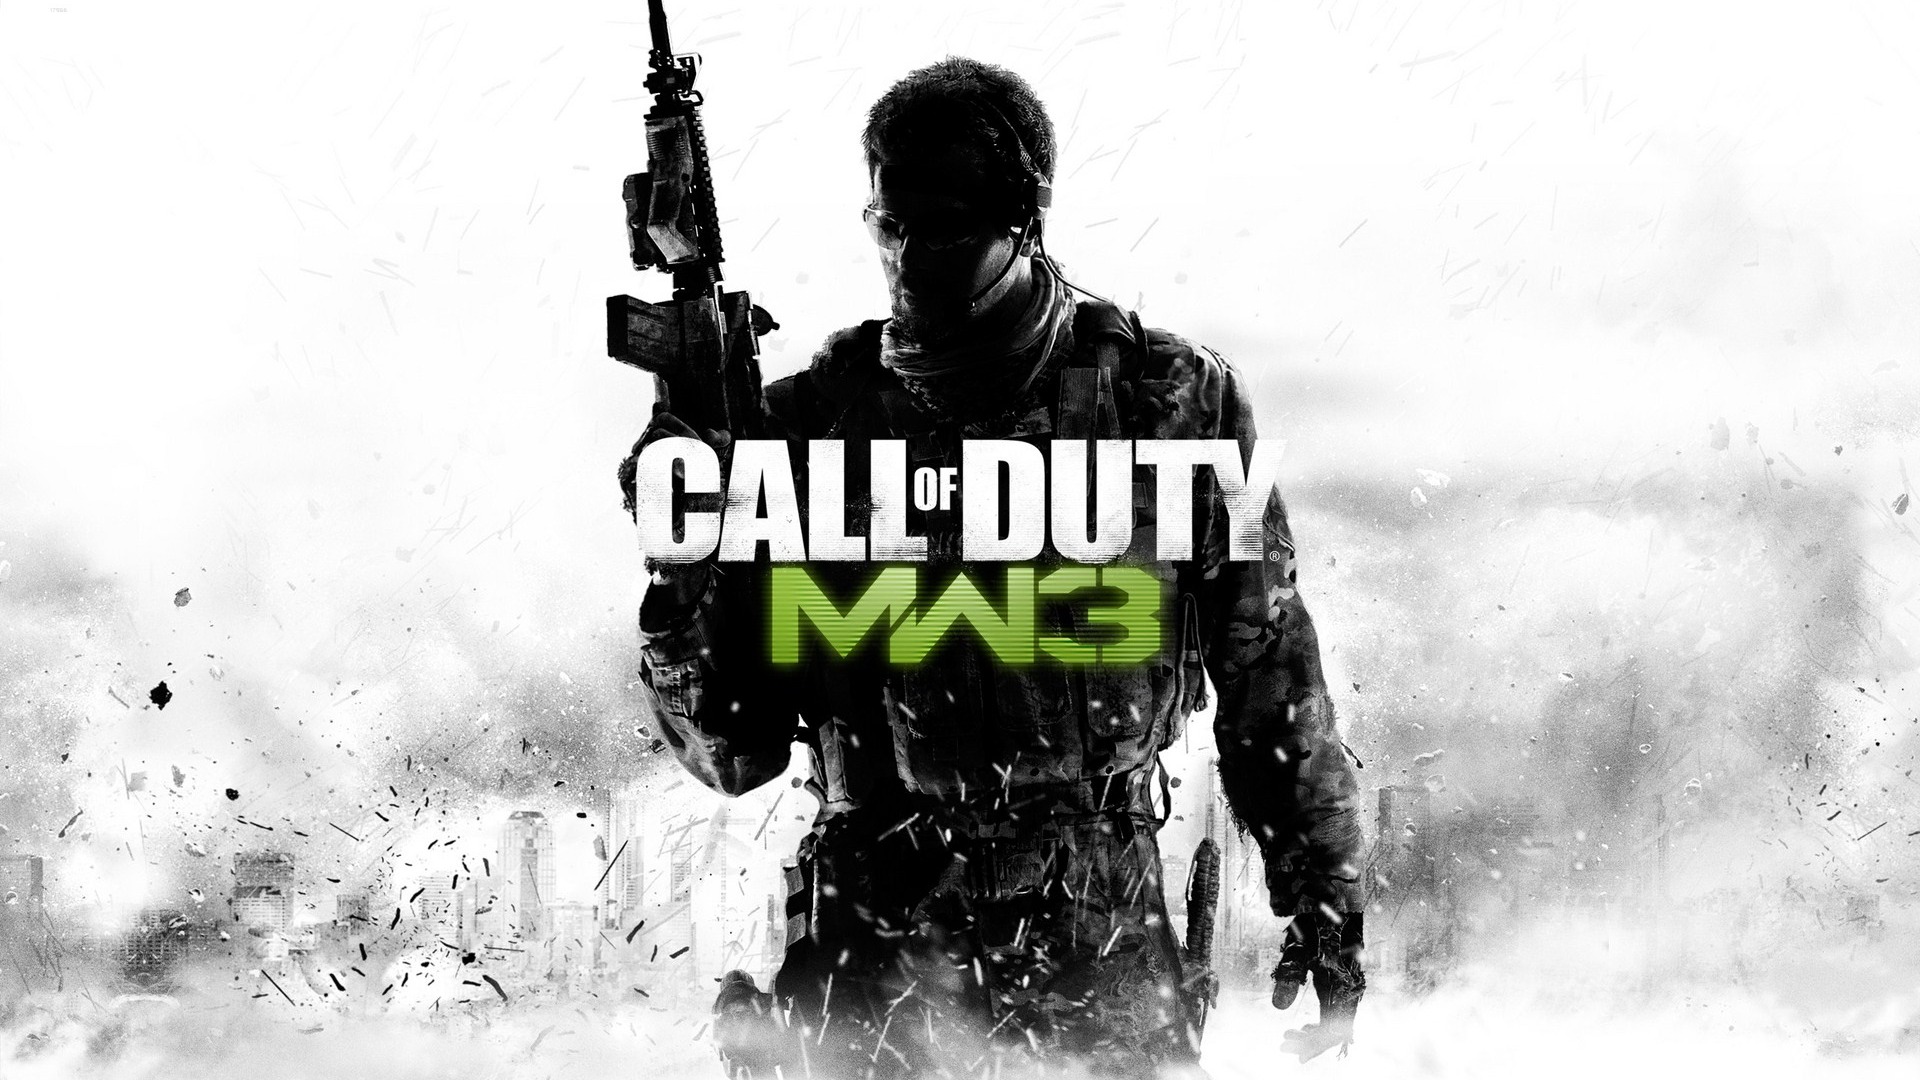 Call of Duty: MW3 wallpapers HD #6 - 1920x1080